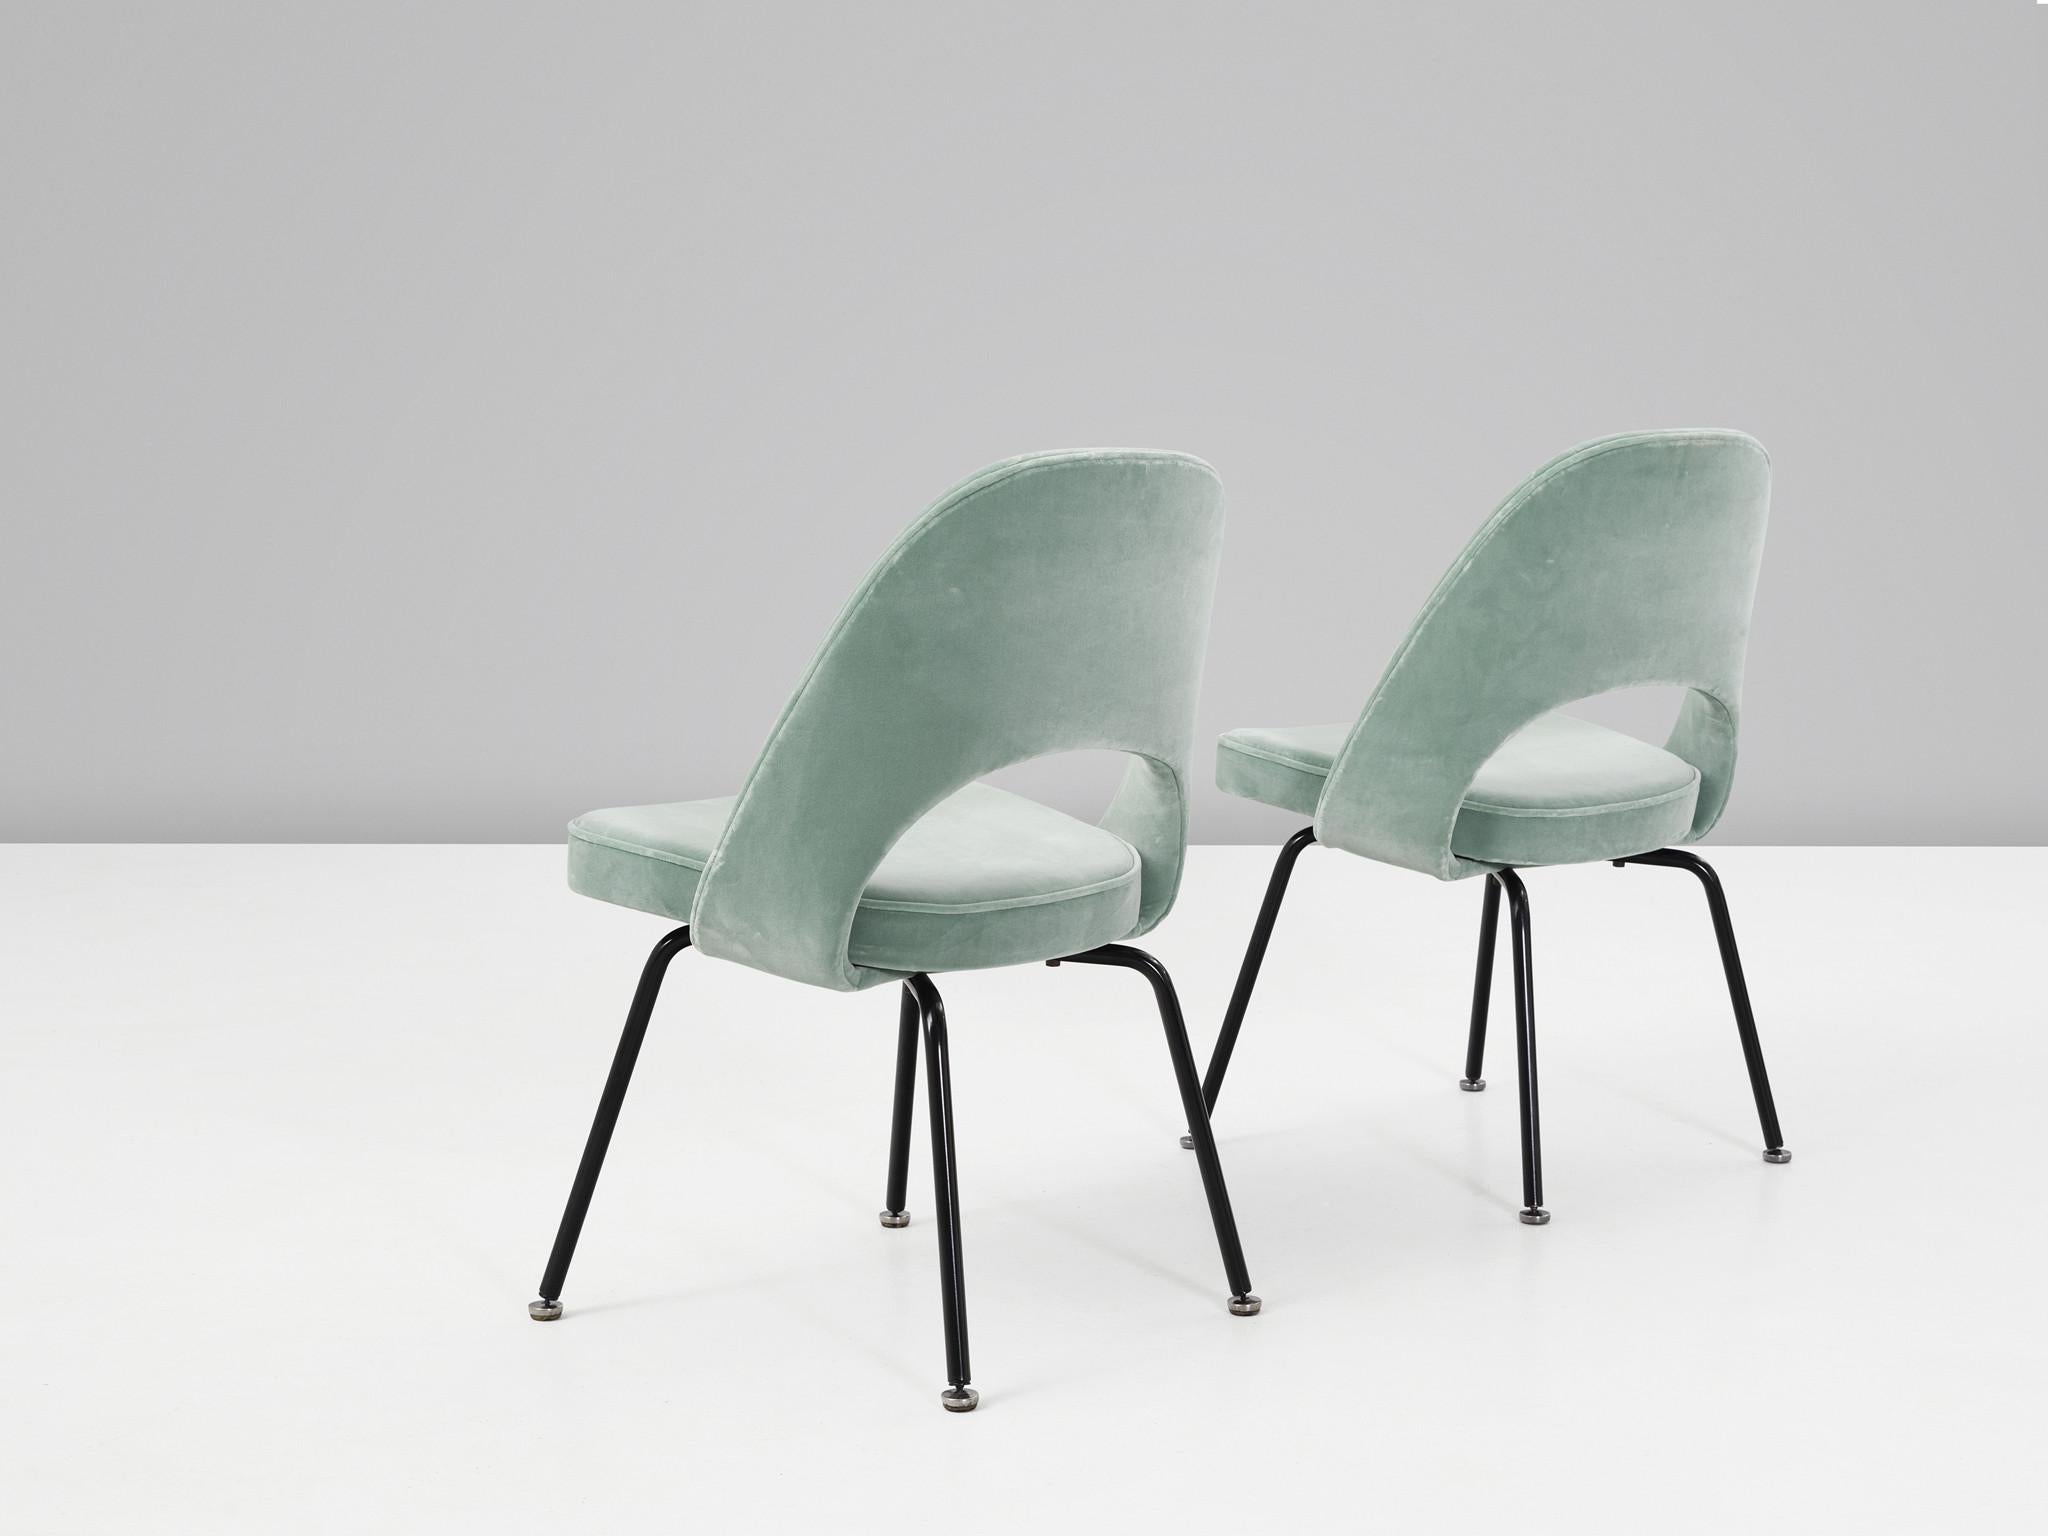 Eero Saarinen for Knoll International, big set of model 72 chairs, in metal and leatherette, United States 1948. 

Big set of organic shaped chairs designed by Eero Saarinen. A fluid, sculptural form. This timeless and versatile design continues to